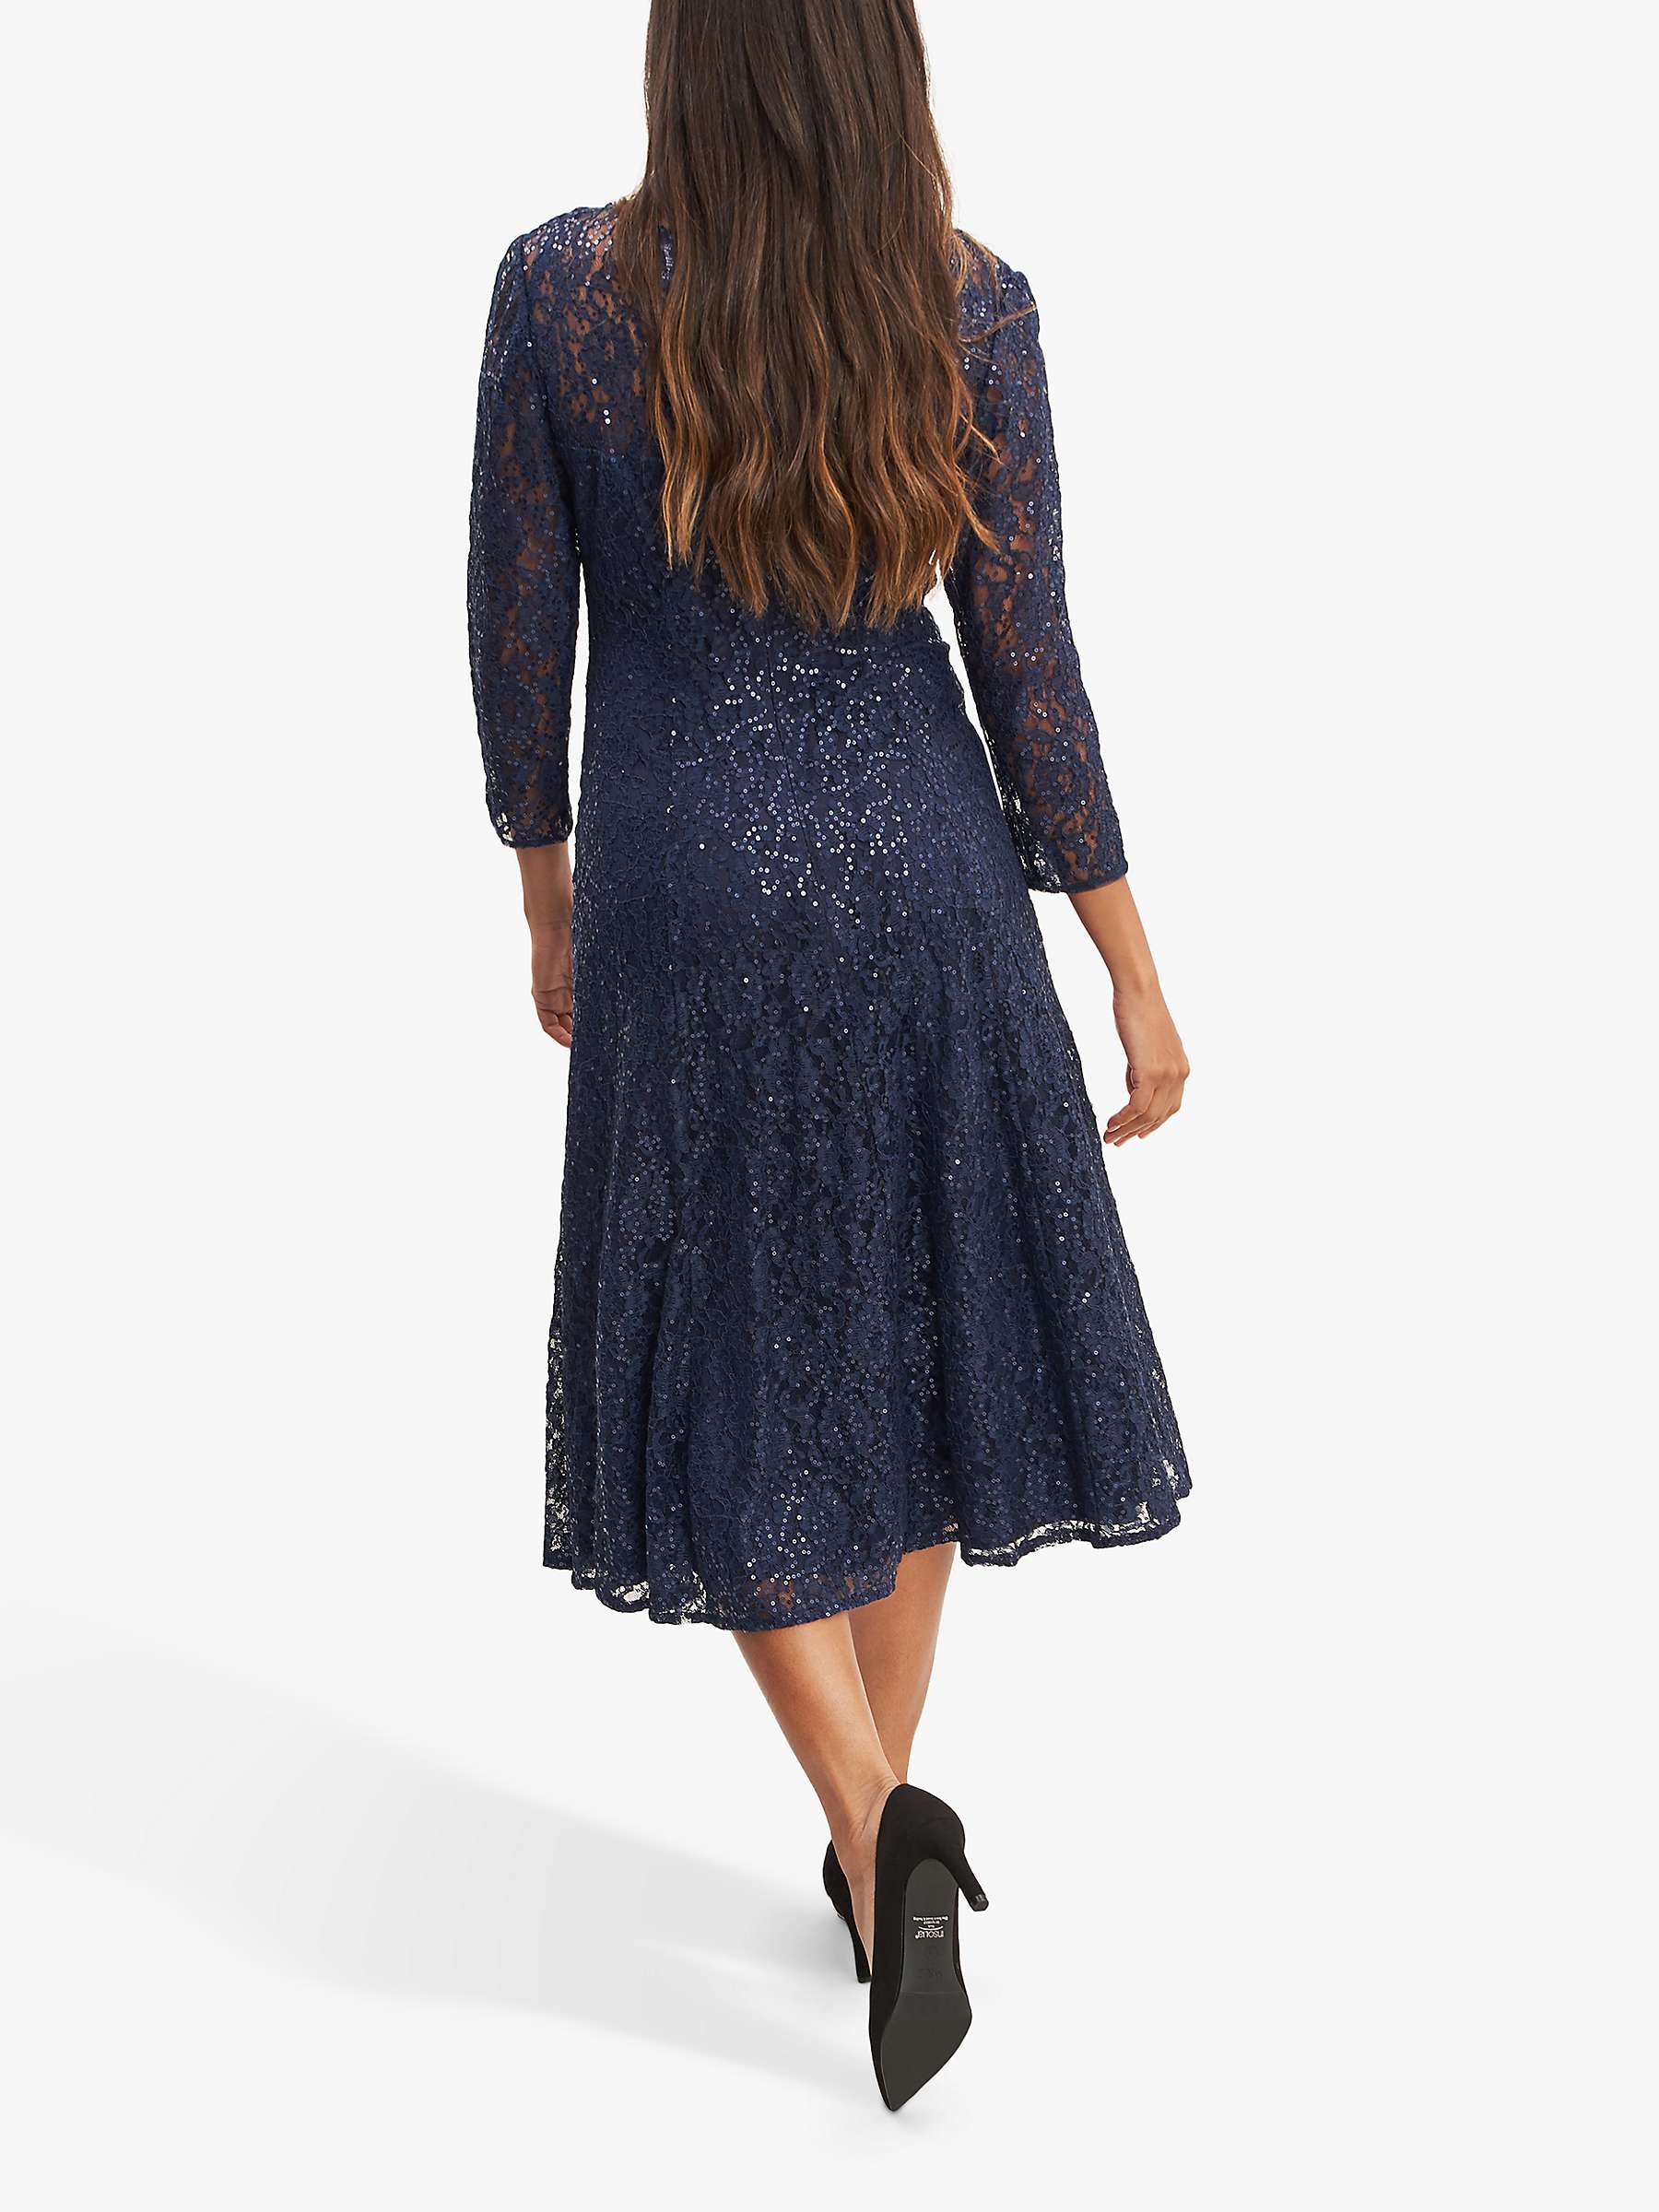 Buy Gina Bacconi Elianna Floral Lace Sequin Midi Dress, Navy Online at johnlewis.com